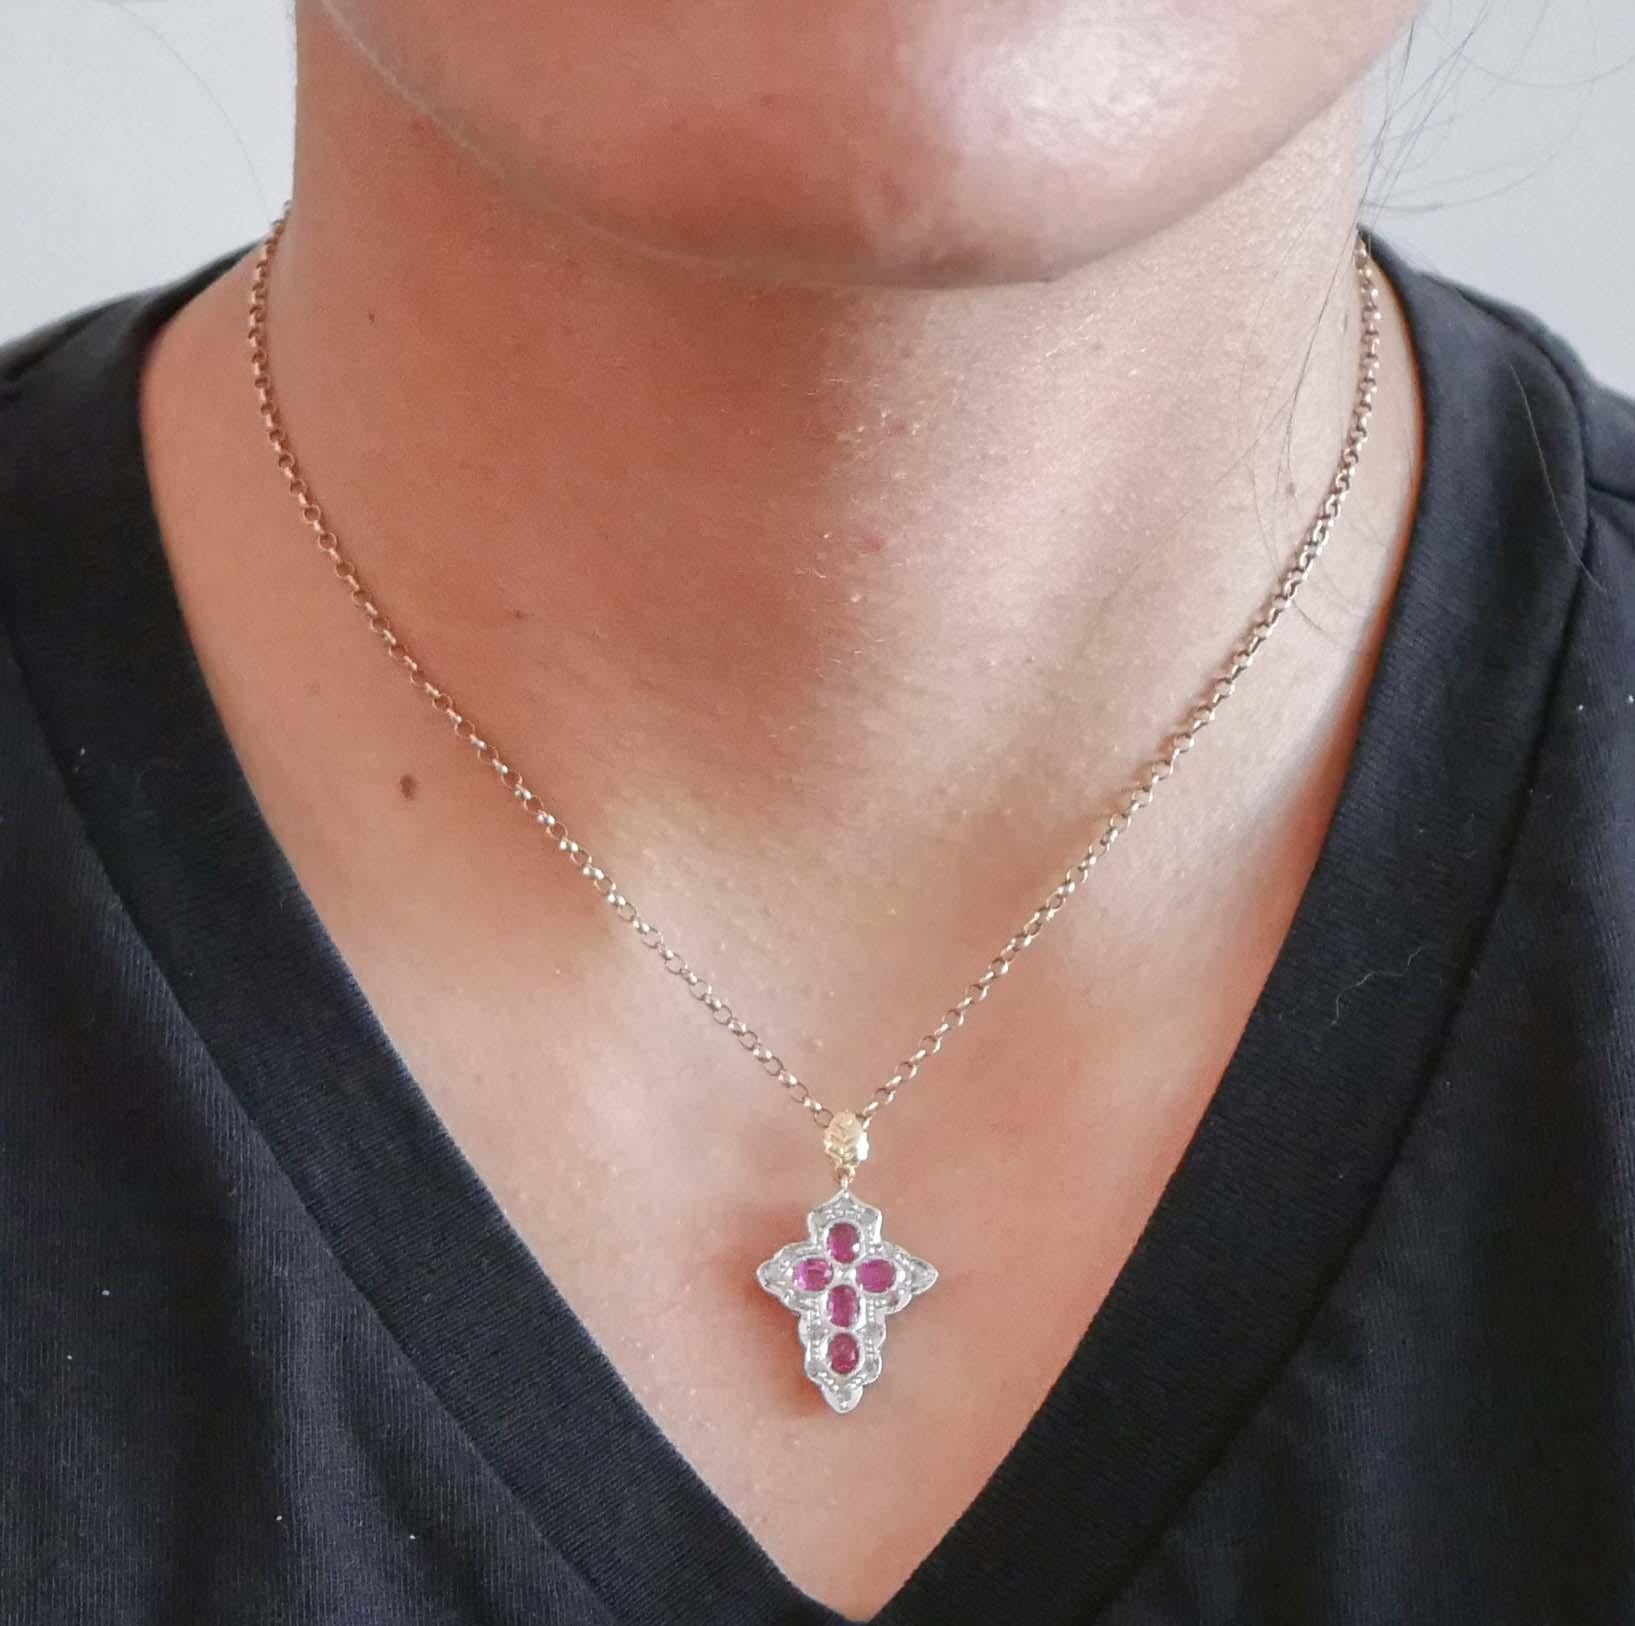 Women's Rubies, Diamonds, Rose Gold and Silver Cross Pendant. For Sale